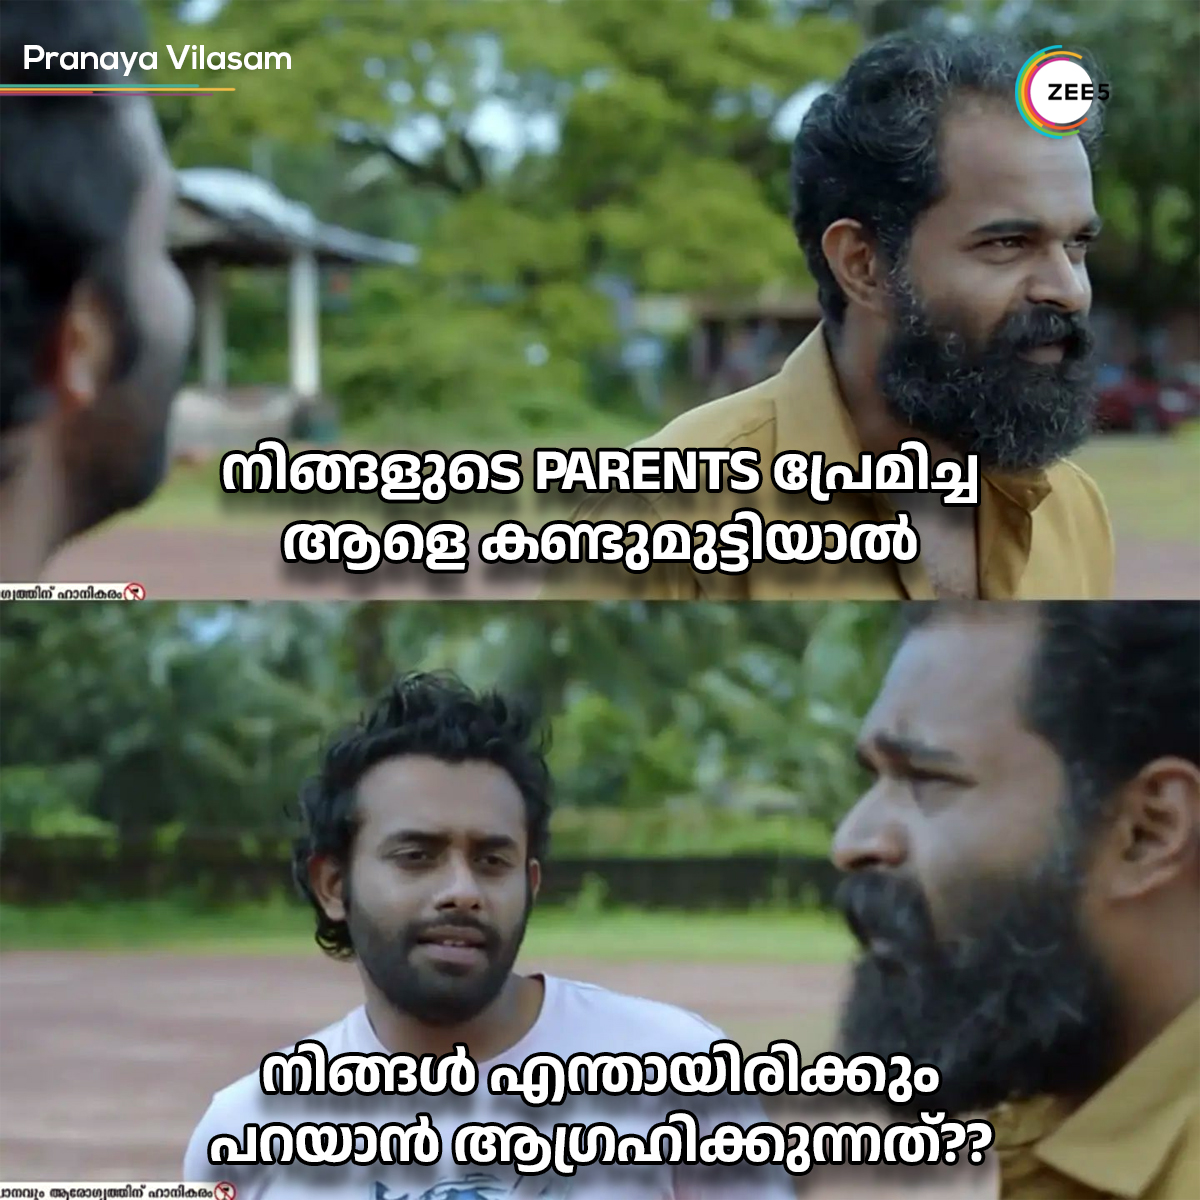 What would you like to say if you meet your PARENTS loved guy ??   Comment now ☺️
 
#Pranyavilasam 
#MalayalamCinema #Malayalam #WatchOnZEE5 #ZEE5Keralam #ZEE5